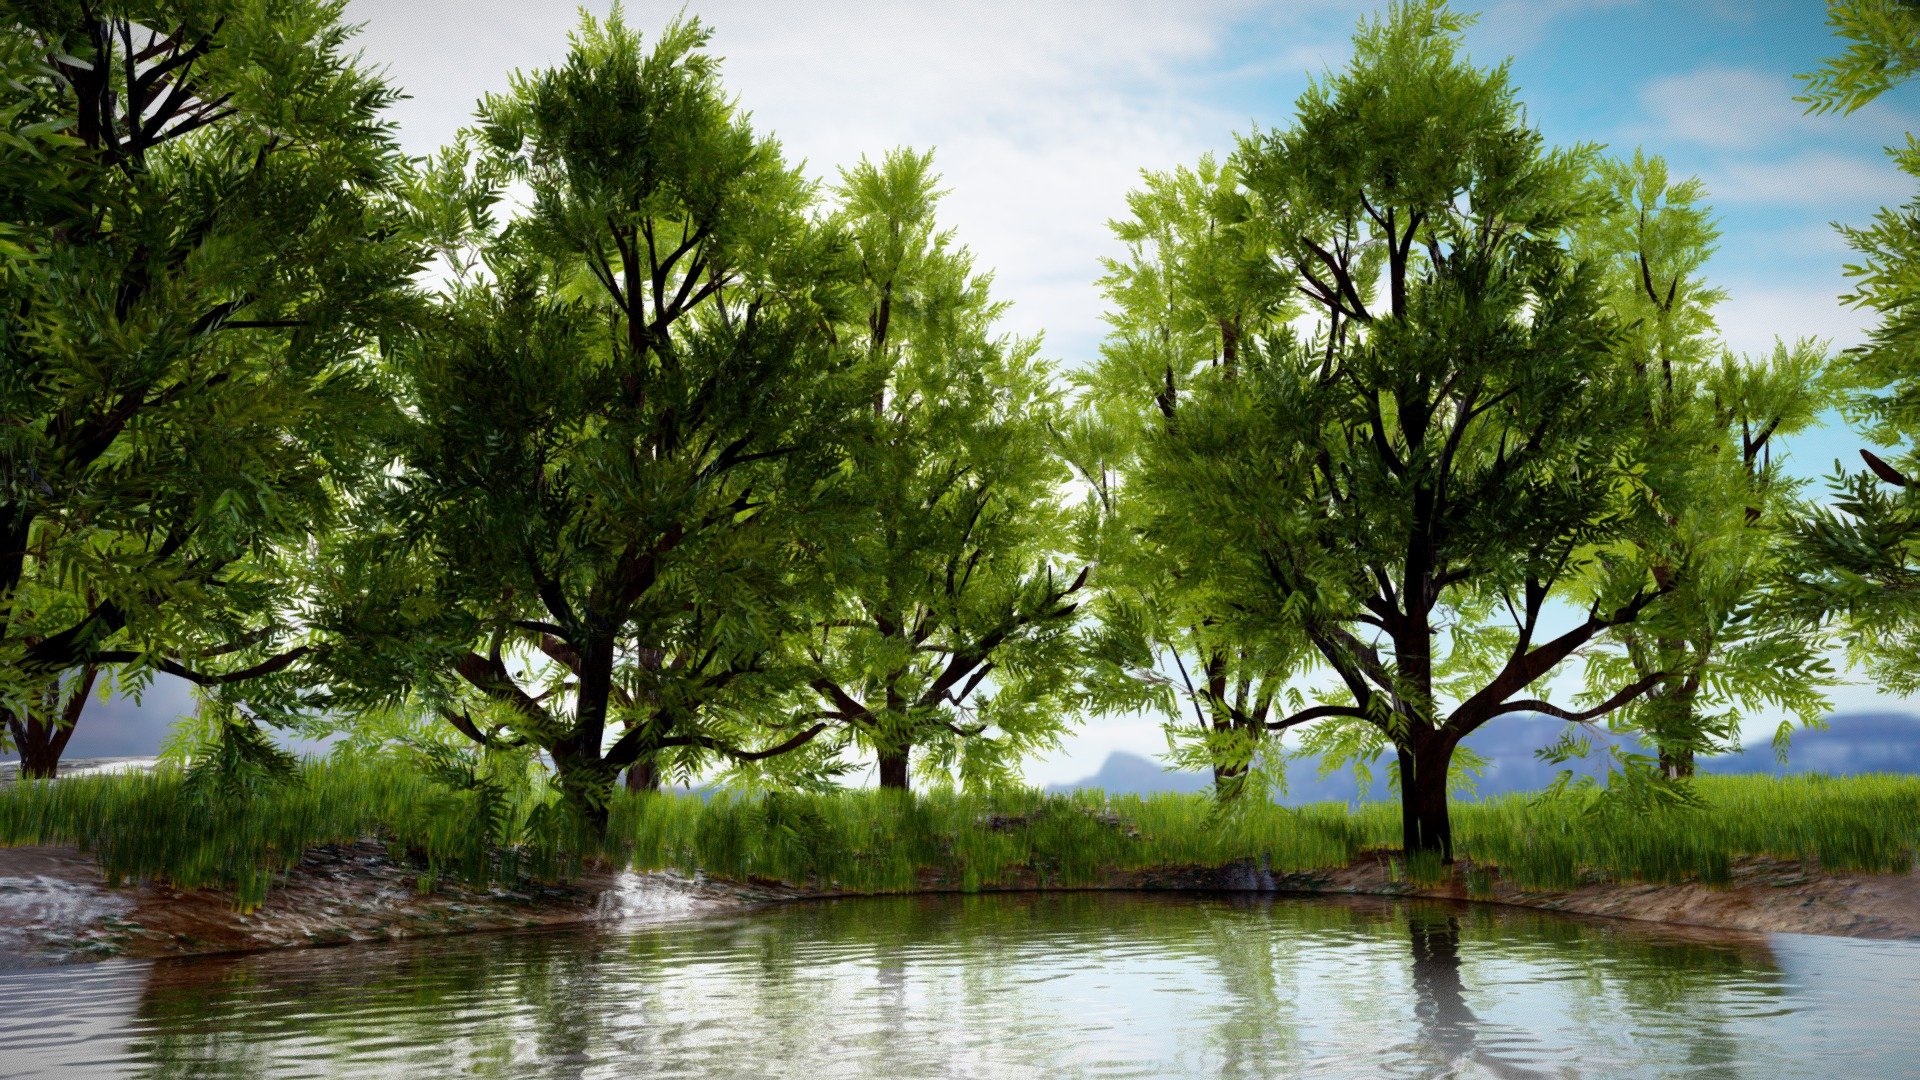 Low Poly Trees Scene Free
Thanks Sketchfab Team and My Followers.
Another Free Asset for achieving 500+ Followers. All the assets used in this scene are free.



Unpack All the Textures from Blend File.


Link For the Free Assets :-
https://sketchfab.com/3d-models/realistic-grass-pack-for-games-free-9b958d613e9a44dbba580748e7a1789c



https://sketchfab.com/3d-models/smooth-rocks-pack-4503b42e55fd4fd4b42f0f18abc43298



https://sketchfab.com/3d-models/ivy-high-poly-f10e66e2e77a4dda9a7147cd89f2082b



https://sketchfab.com/3d-models/more-realistic-trees-free-b5b506fc4f5d4af9b546283bdf0c6a15

Thank You!
Like and Follow for more free models in future! - Low Poly Tree Scene Free - Download Free 3D model by Nicholas-3D (@Nicholas01) 3d model